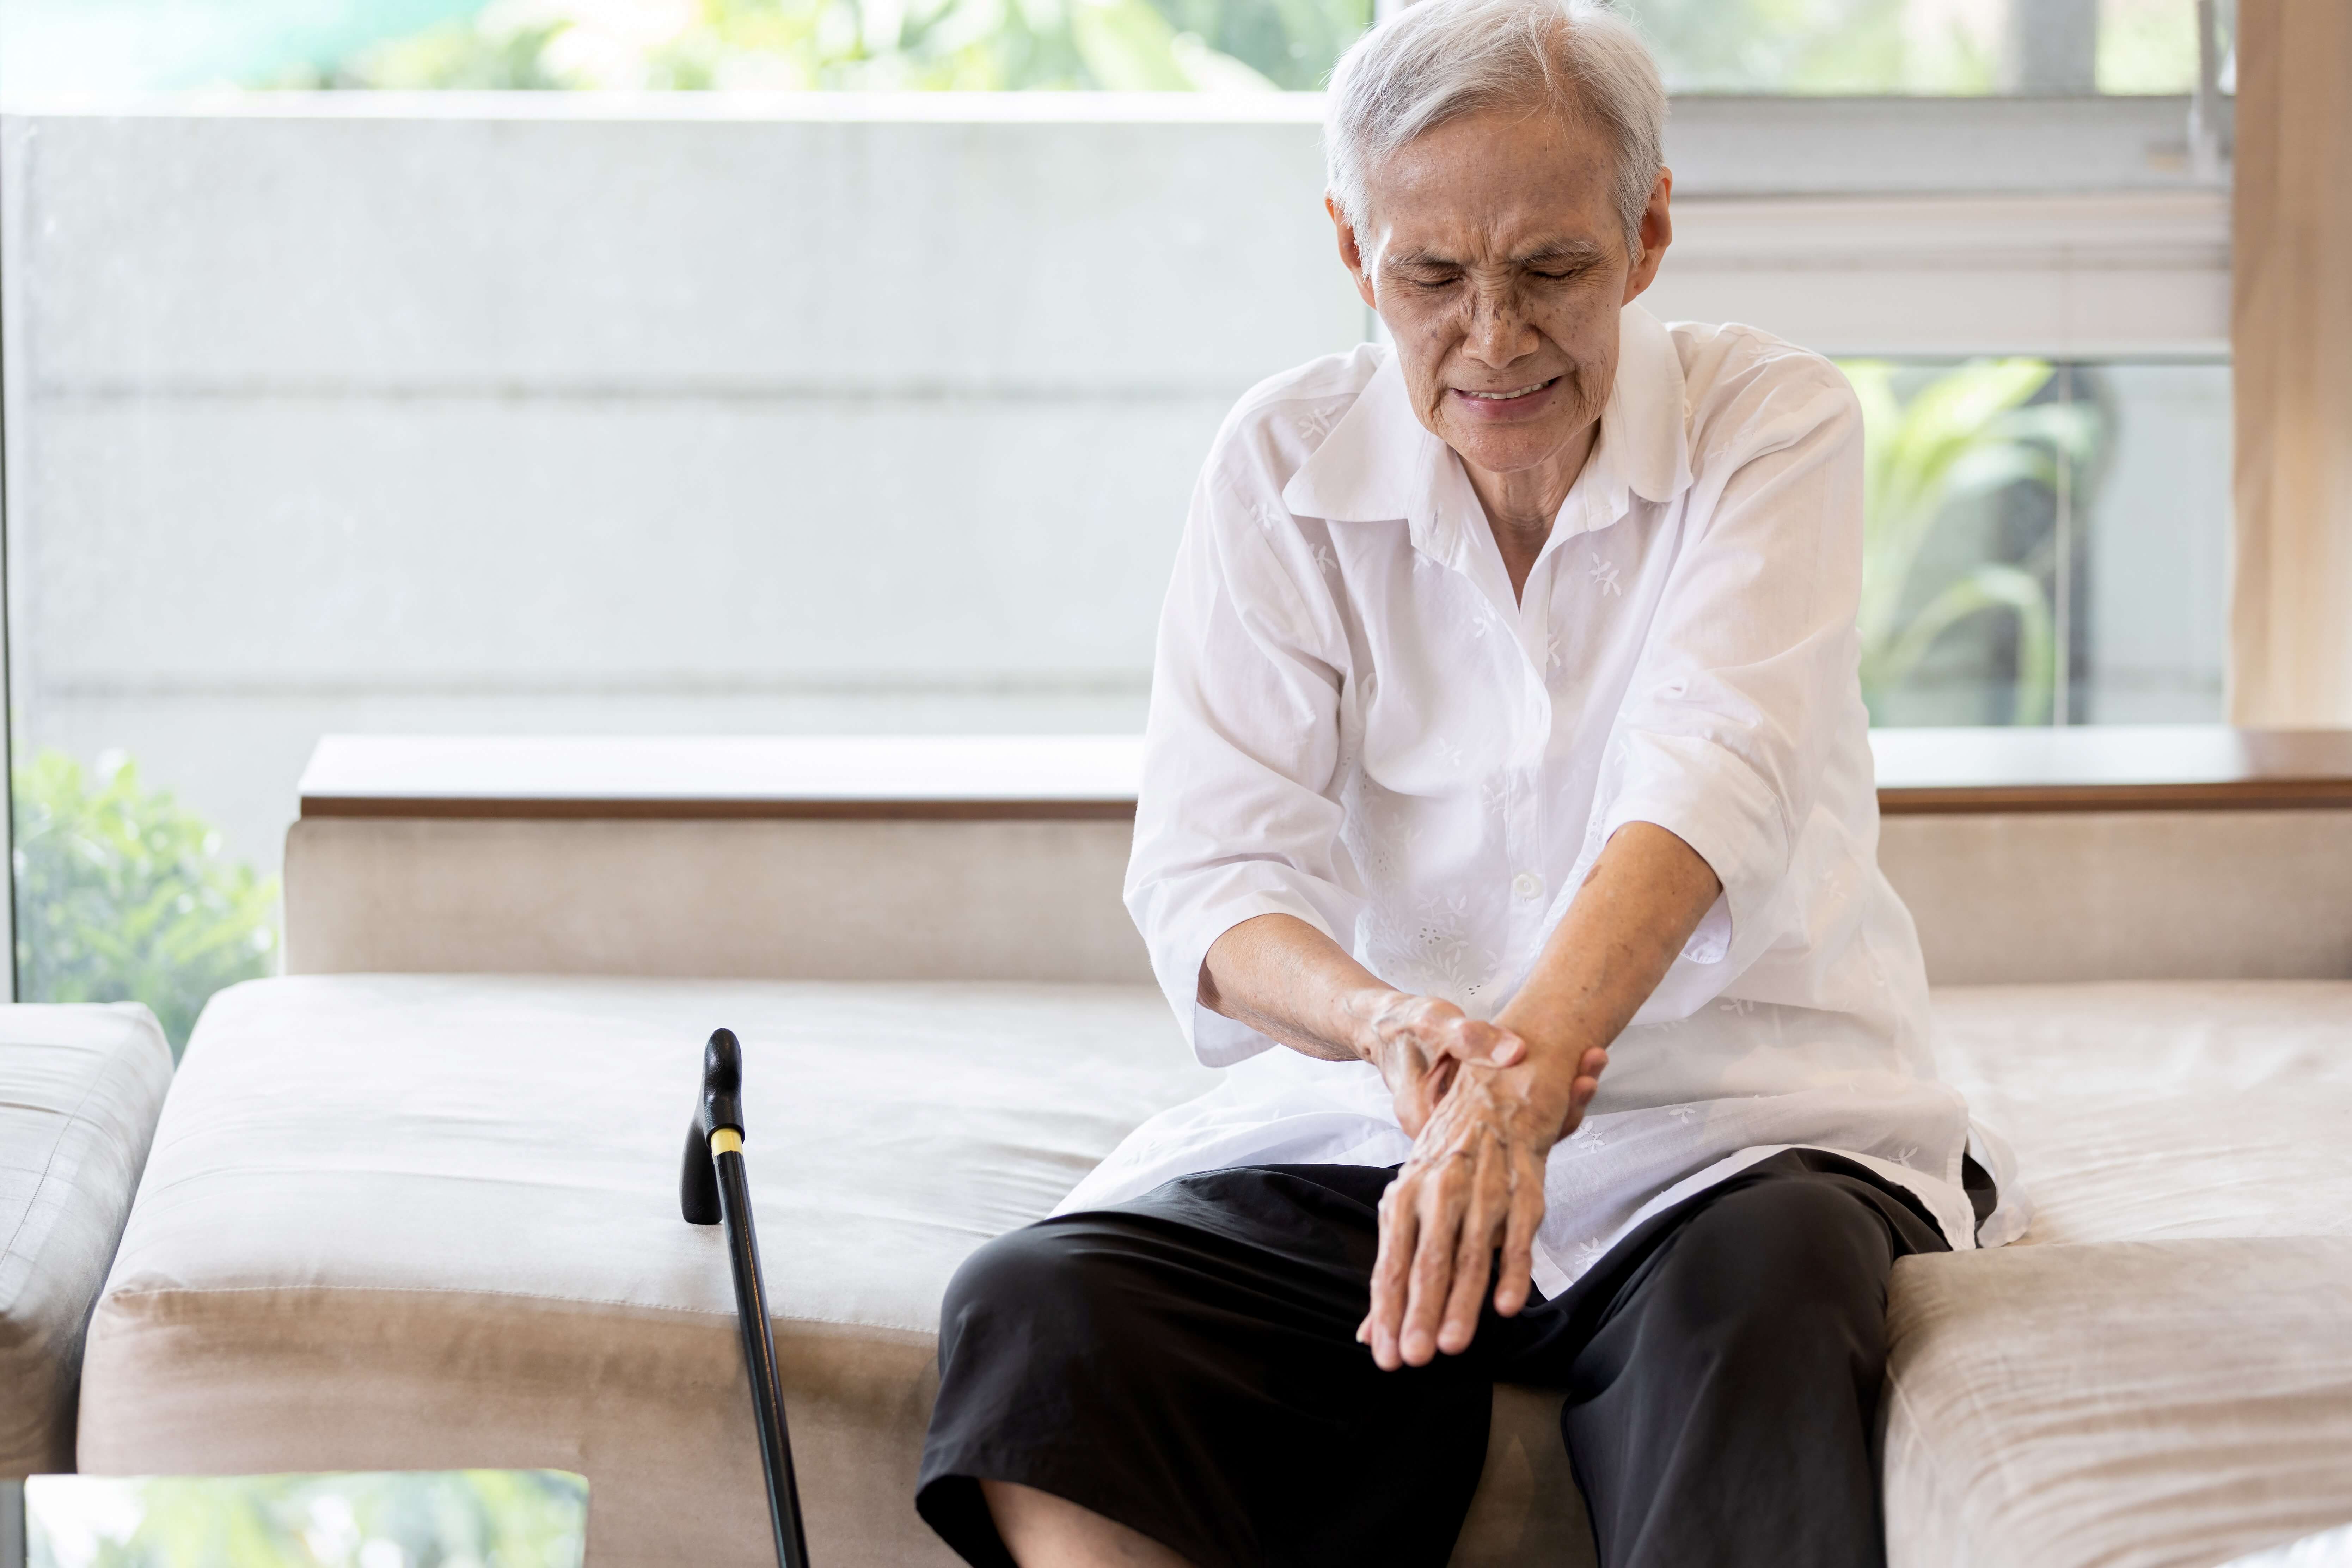 image of arthritis patient on our DC online continuing education page